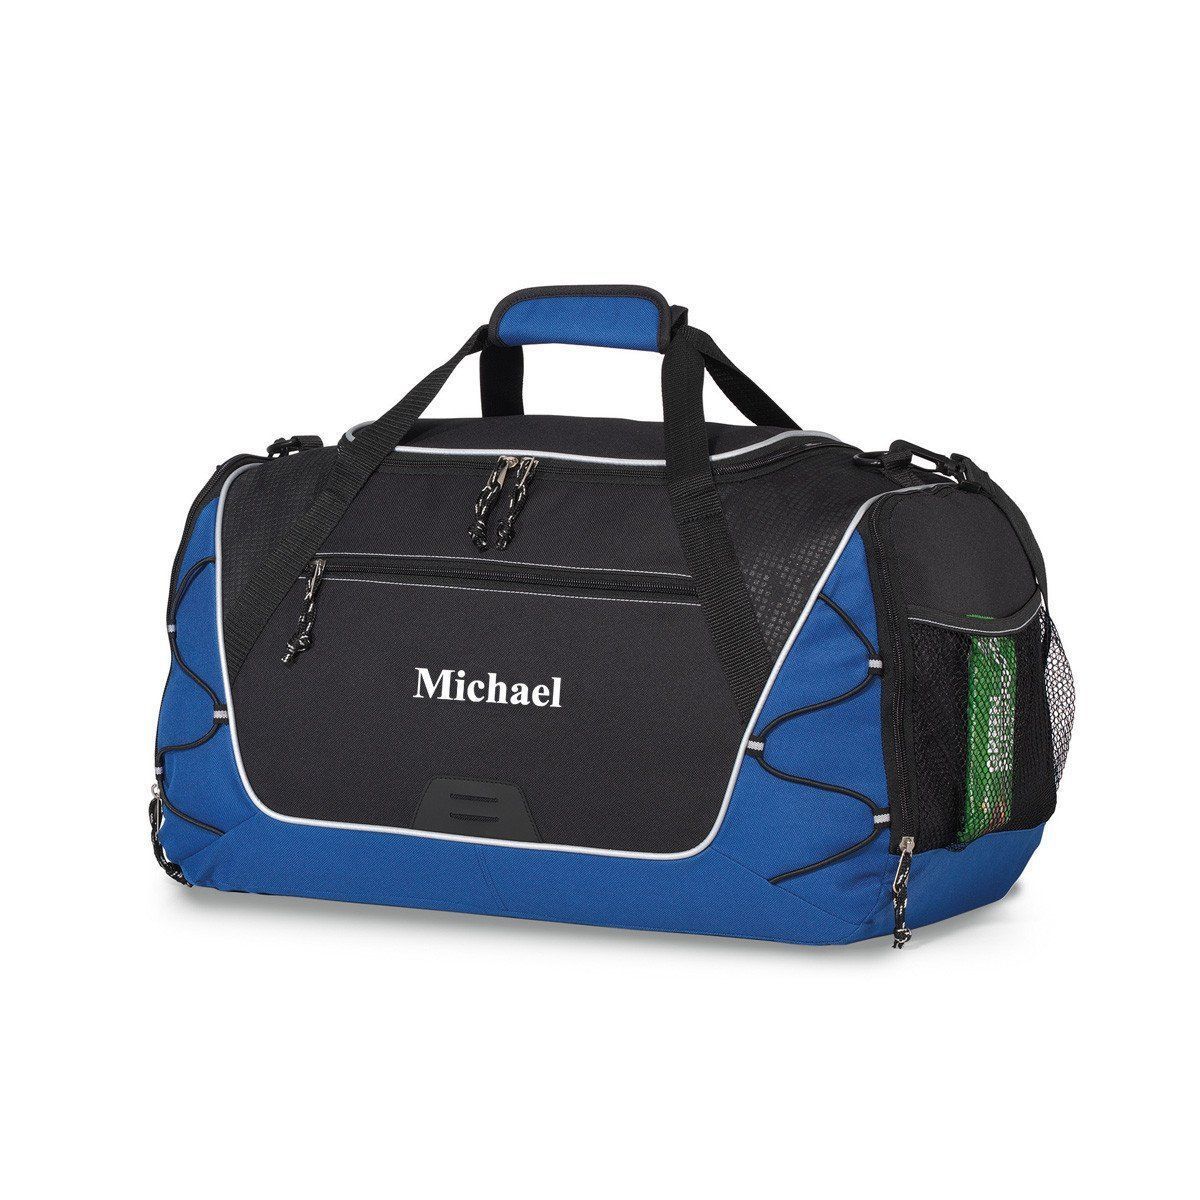 Personalized Sports Weekender Gym Bag and Duffel Travel Bag